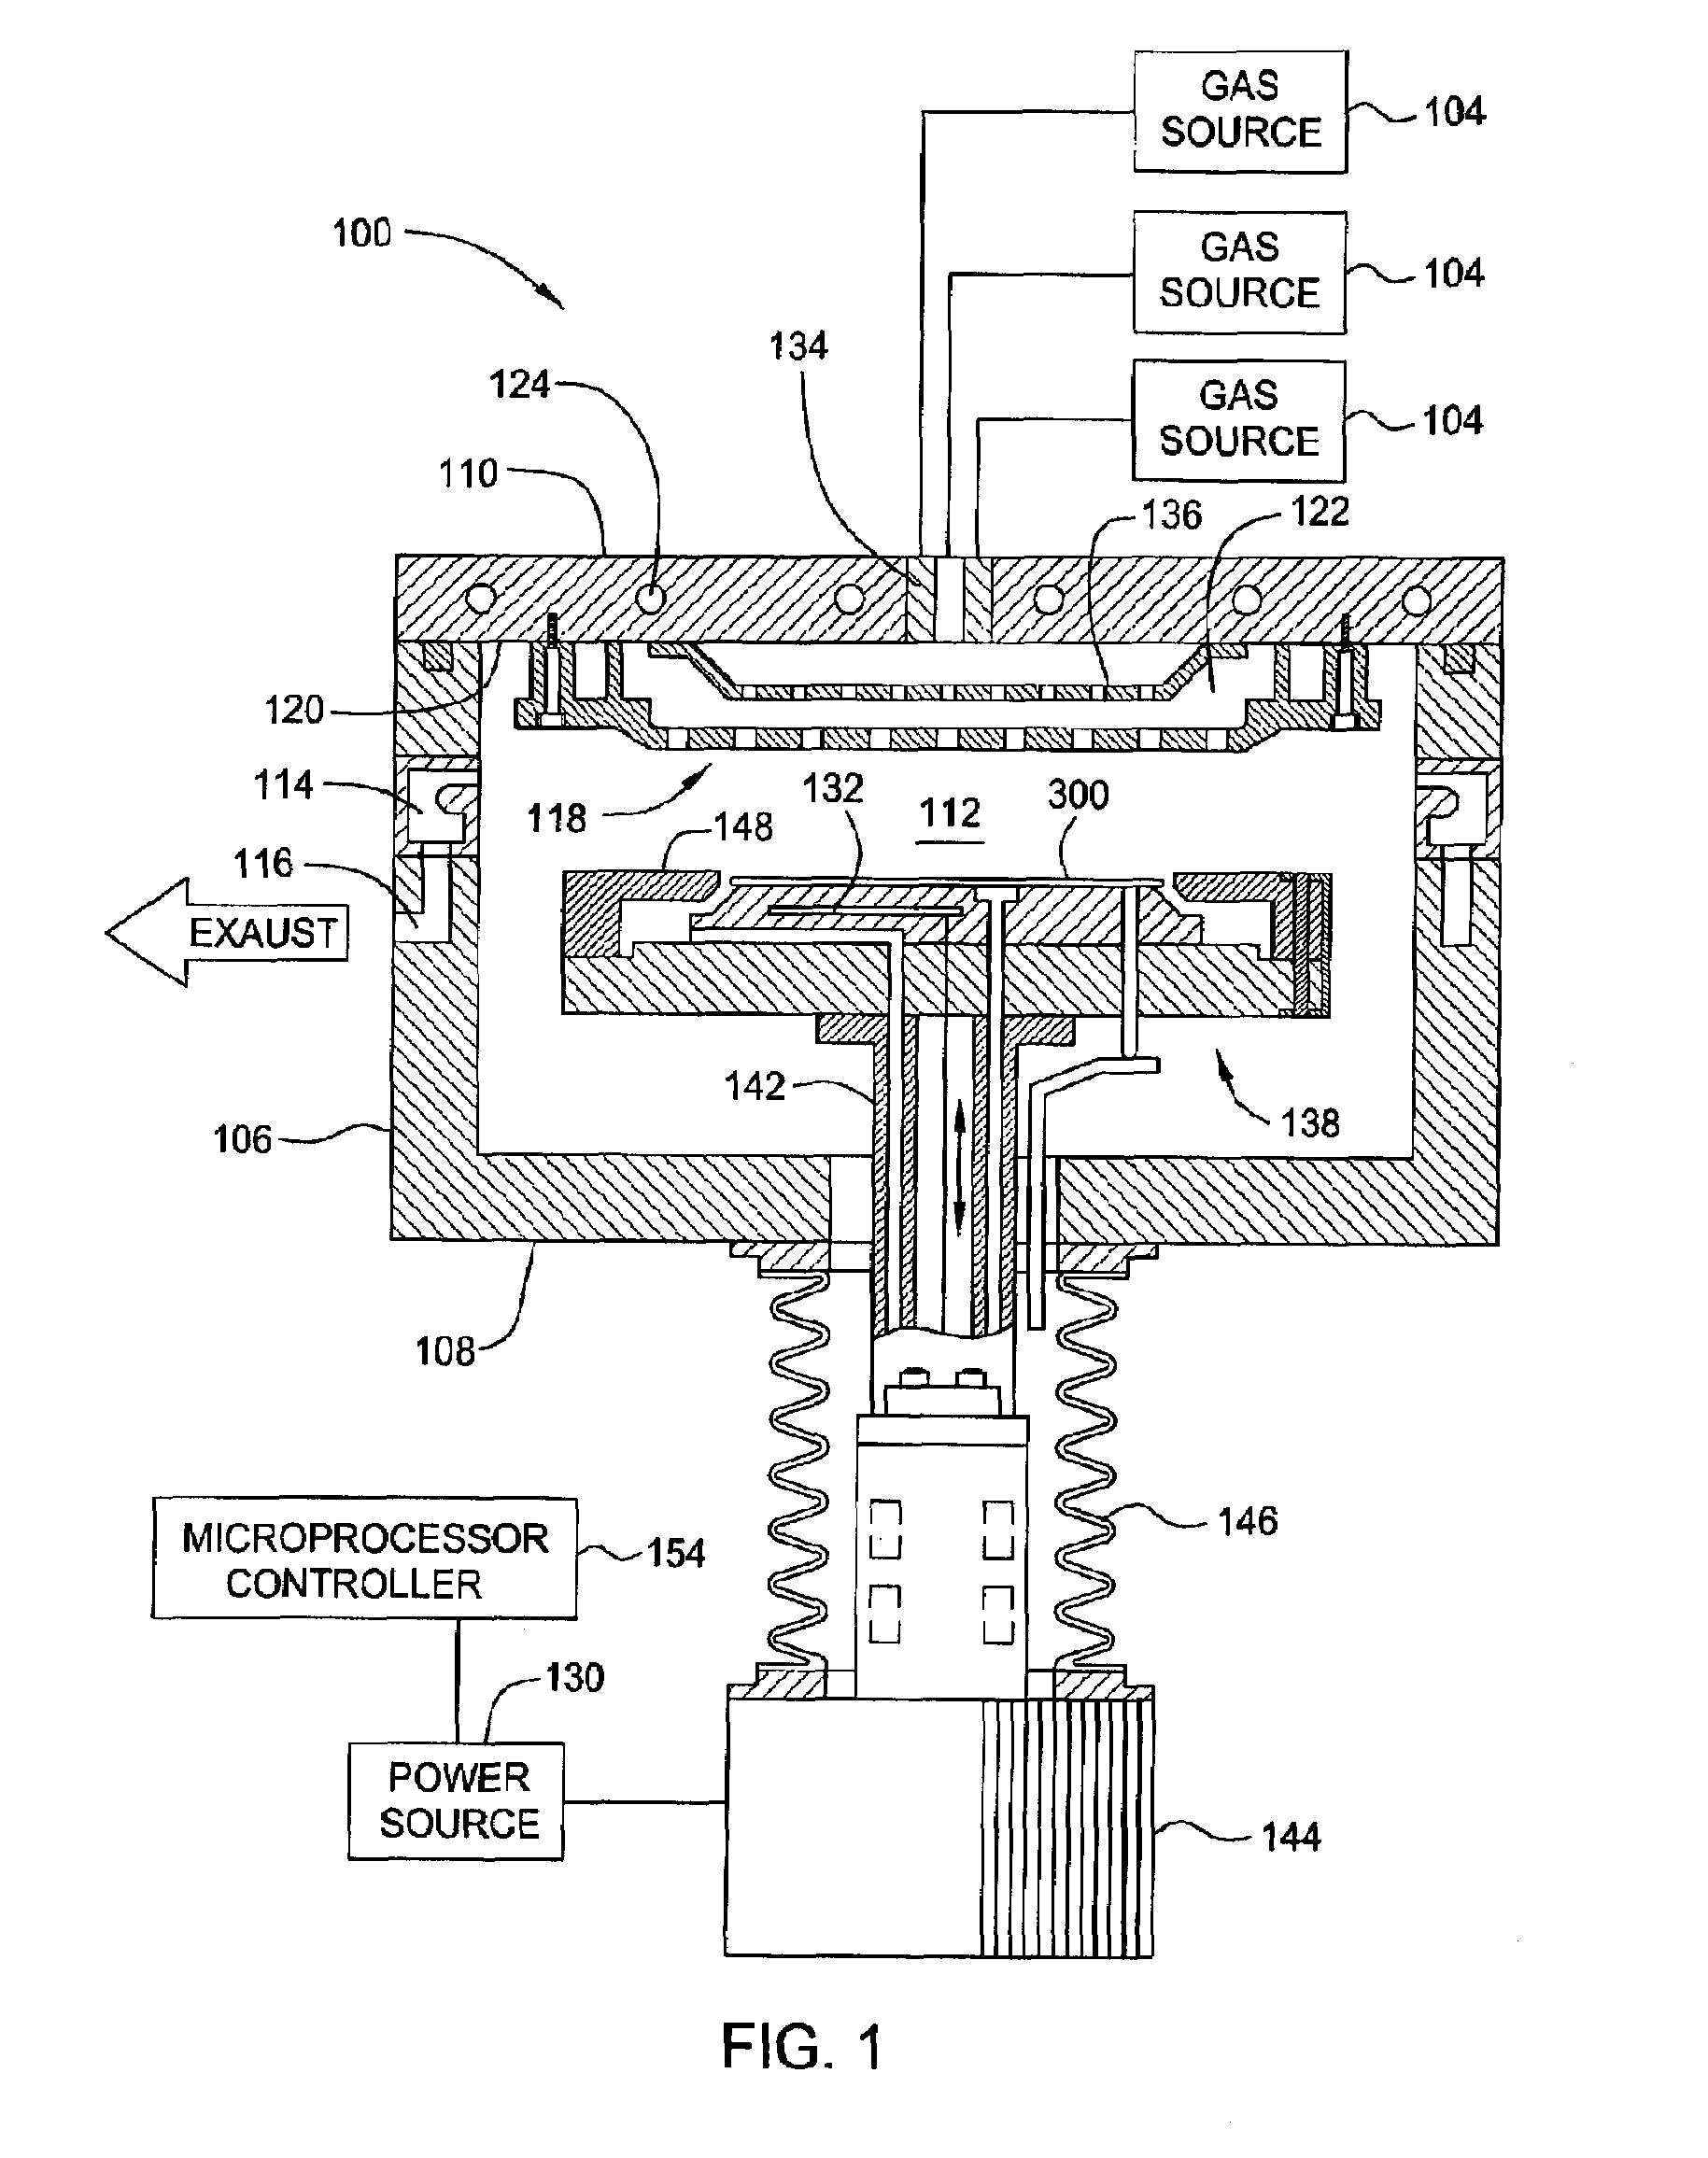 Pulsed deposition process for tungsten nucleation